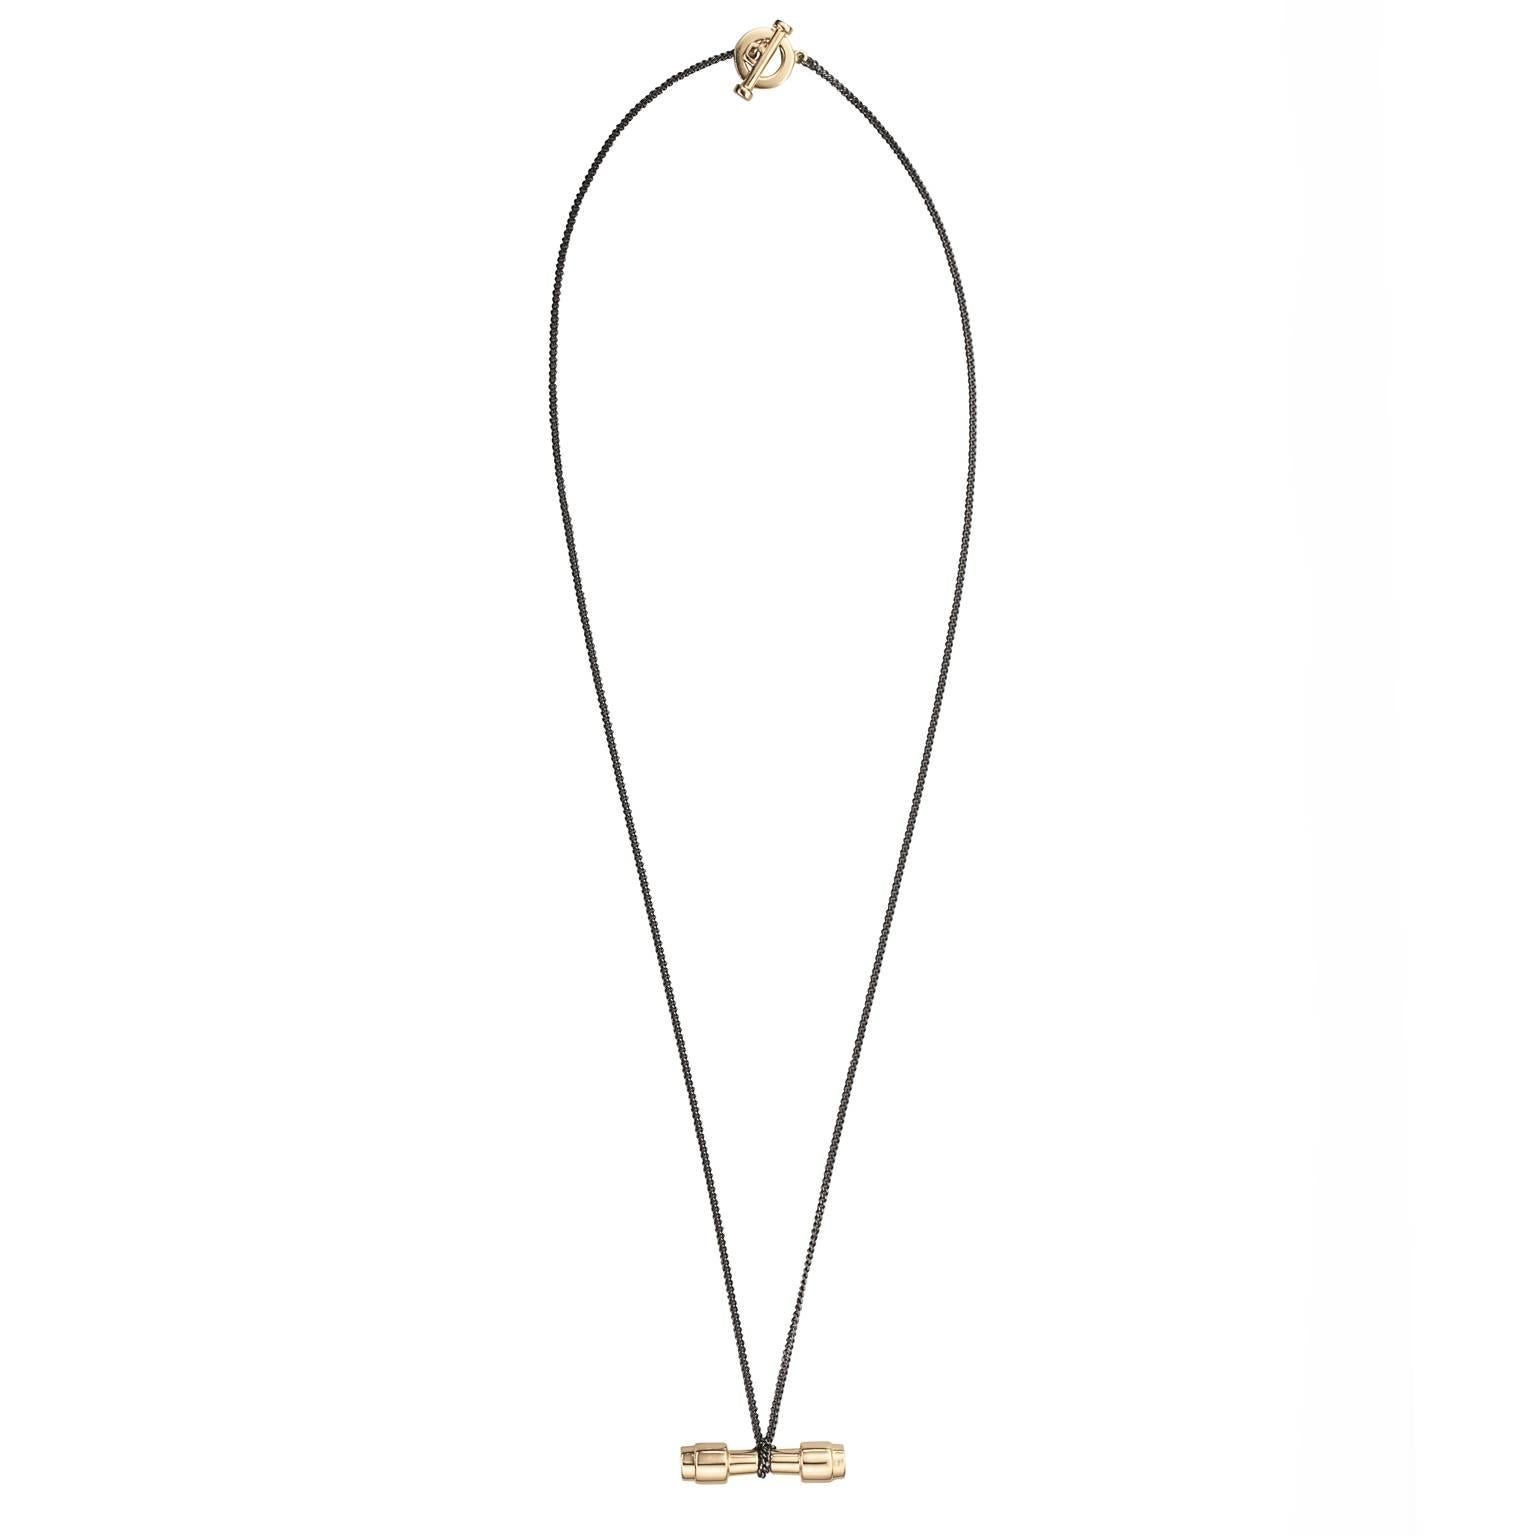 This 18k yellow gold necklace captures the barrel of a traditional ship's shackle on its chain. The sculptural yet simple gold bar on chain sits elegantly on the man or woman who wears it - a play on a traditional style, with a modern